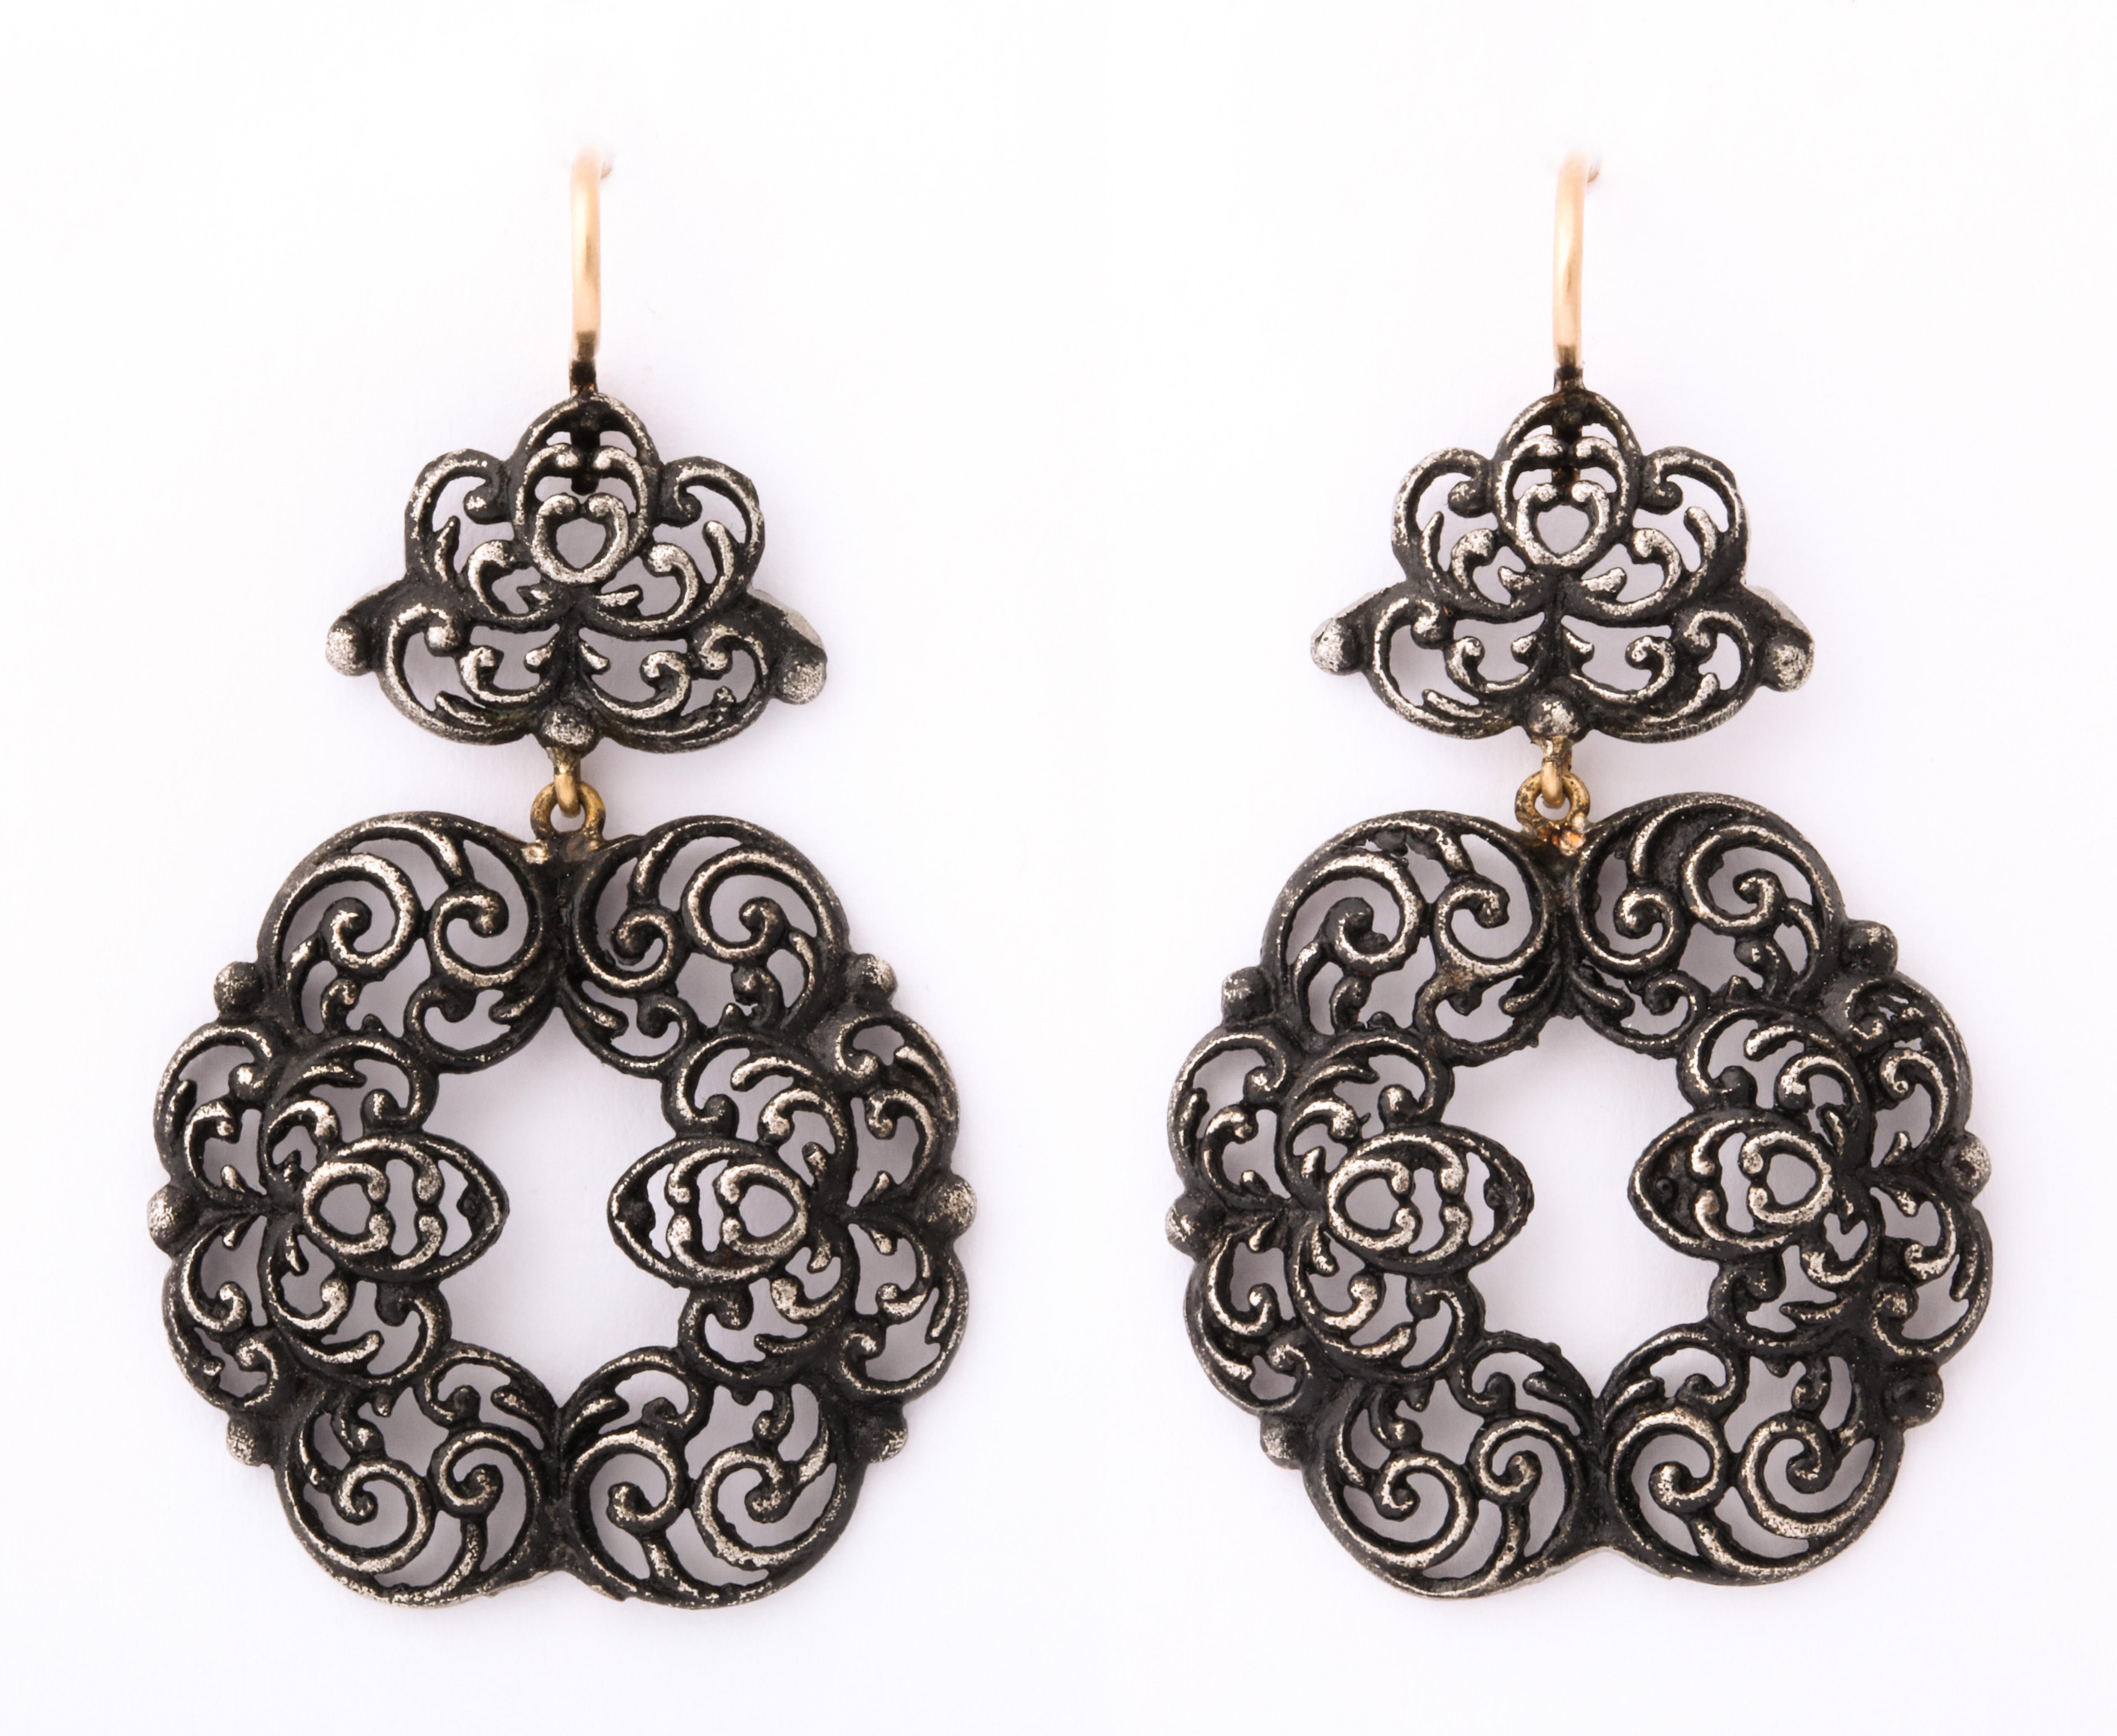 A pair of Berlin Iron Earrings that are feather weight and look like fine lace swirls. The earrings have a gold ear wire were made from a Geiss necklace that e to c.1820. During the Napoleonic wars, Germany asked their citizens to turn in their gold